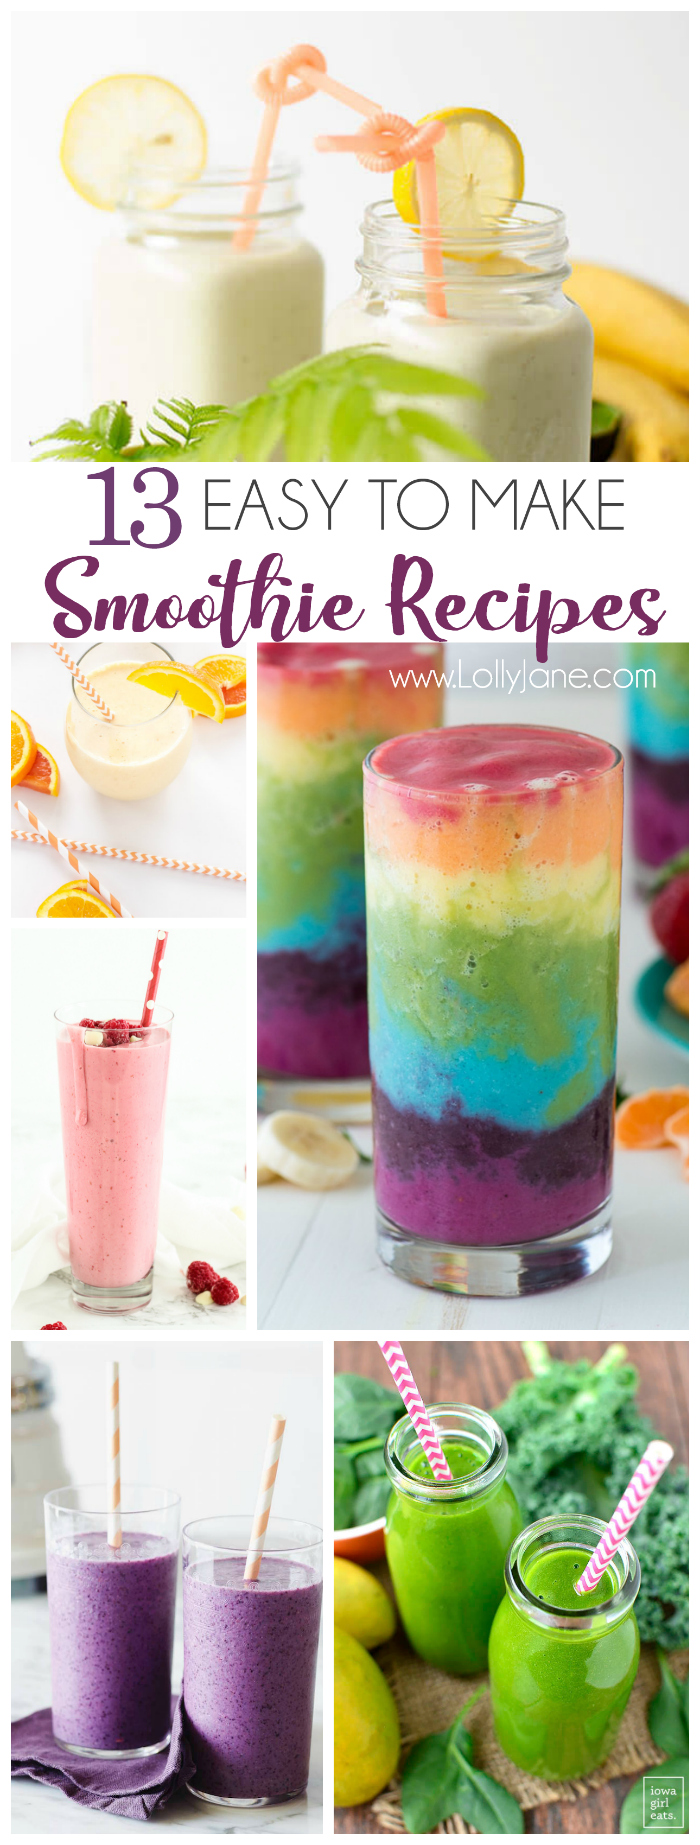 13 easy to make smoothie recipes! We love this collection of breakfast smoothies, so yummy! The best green smoothie recipes and yummy fruit smoothies to make!